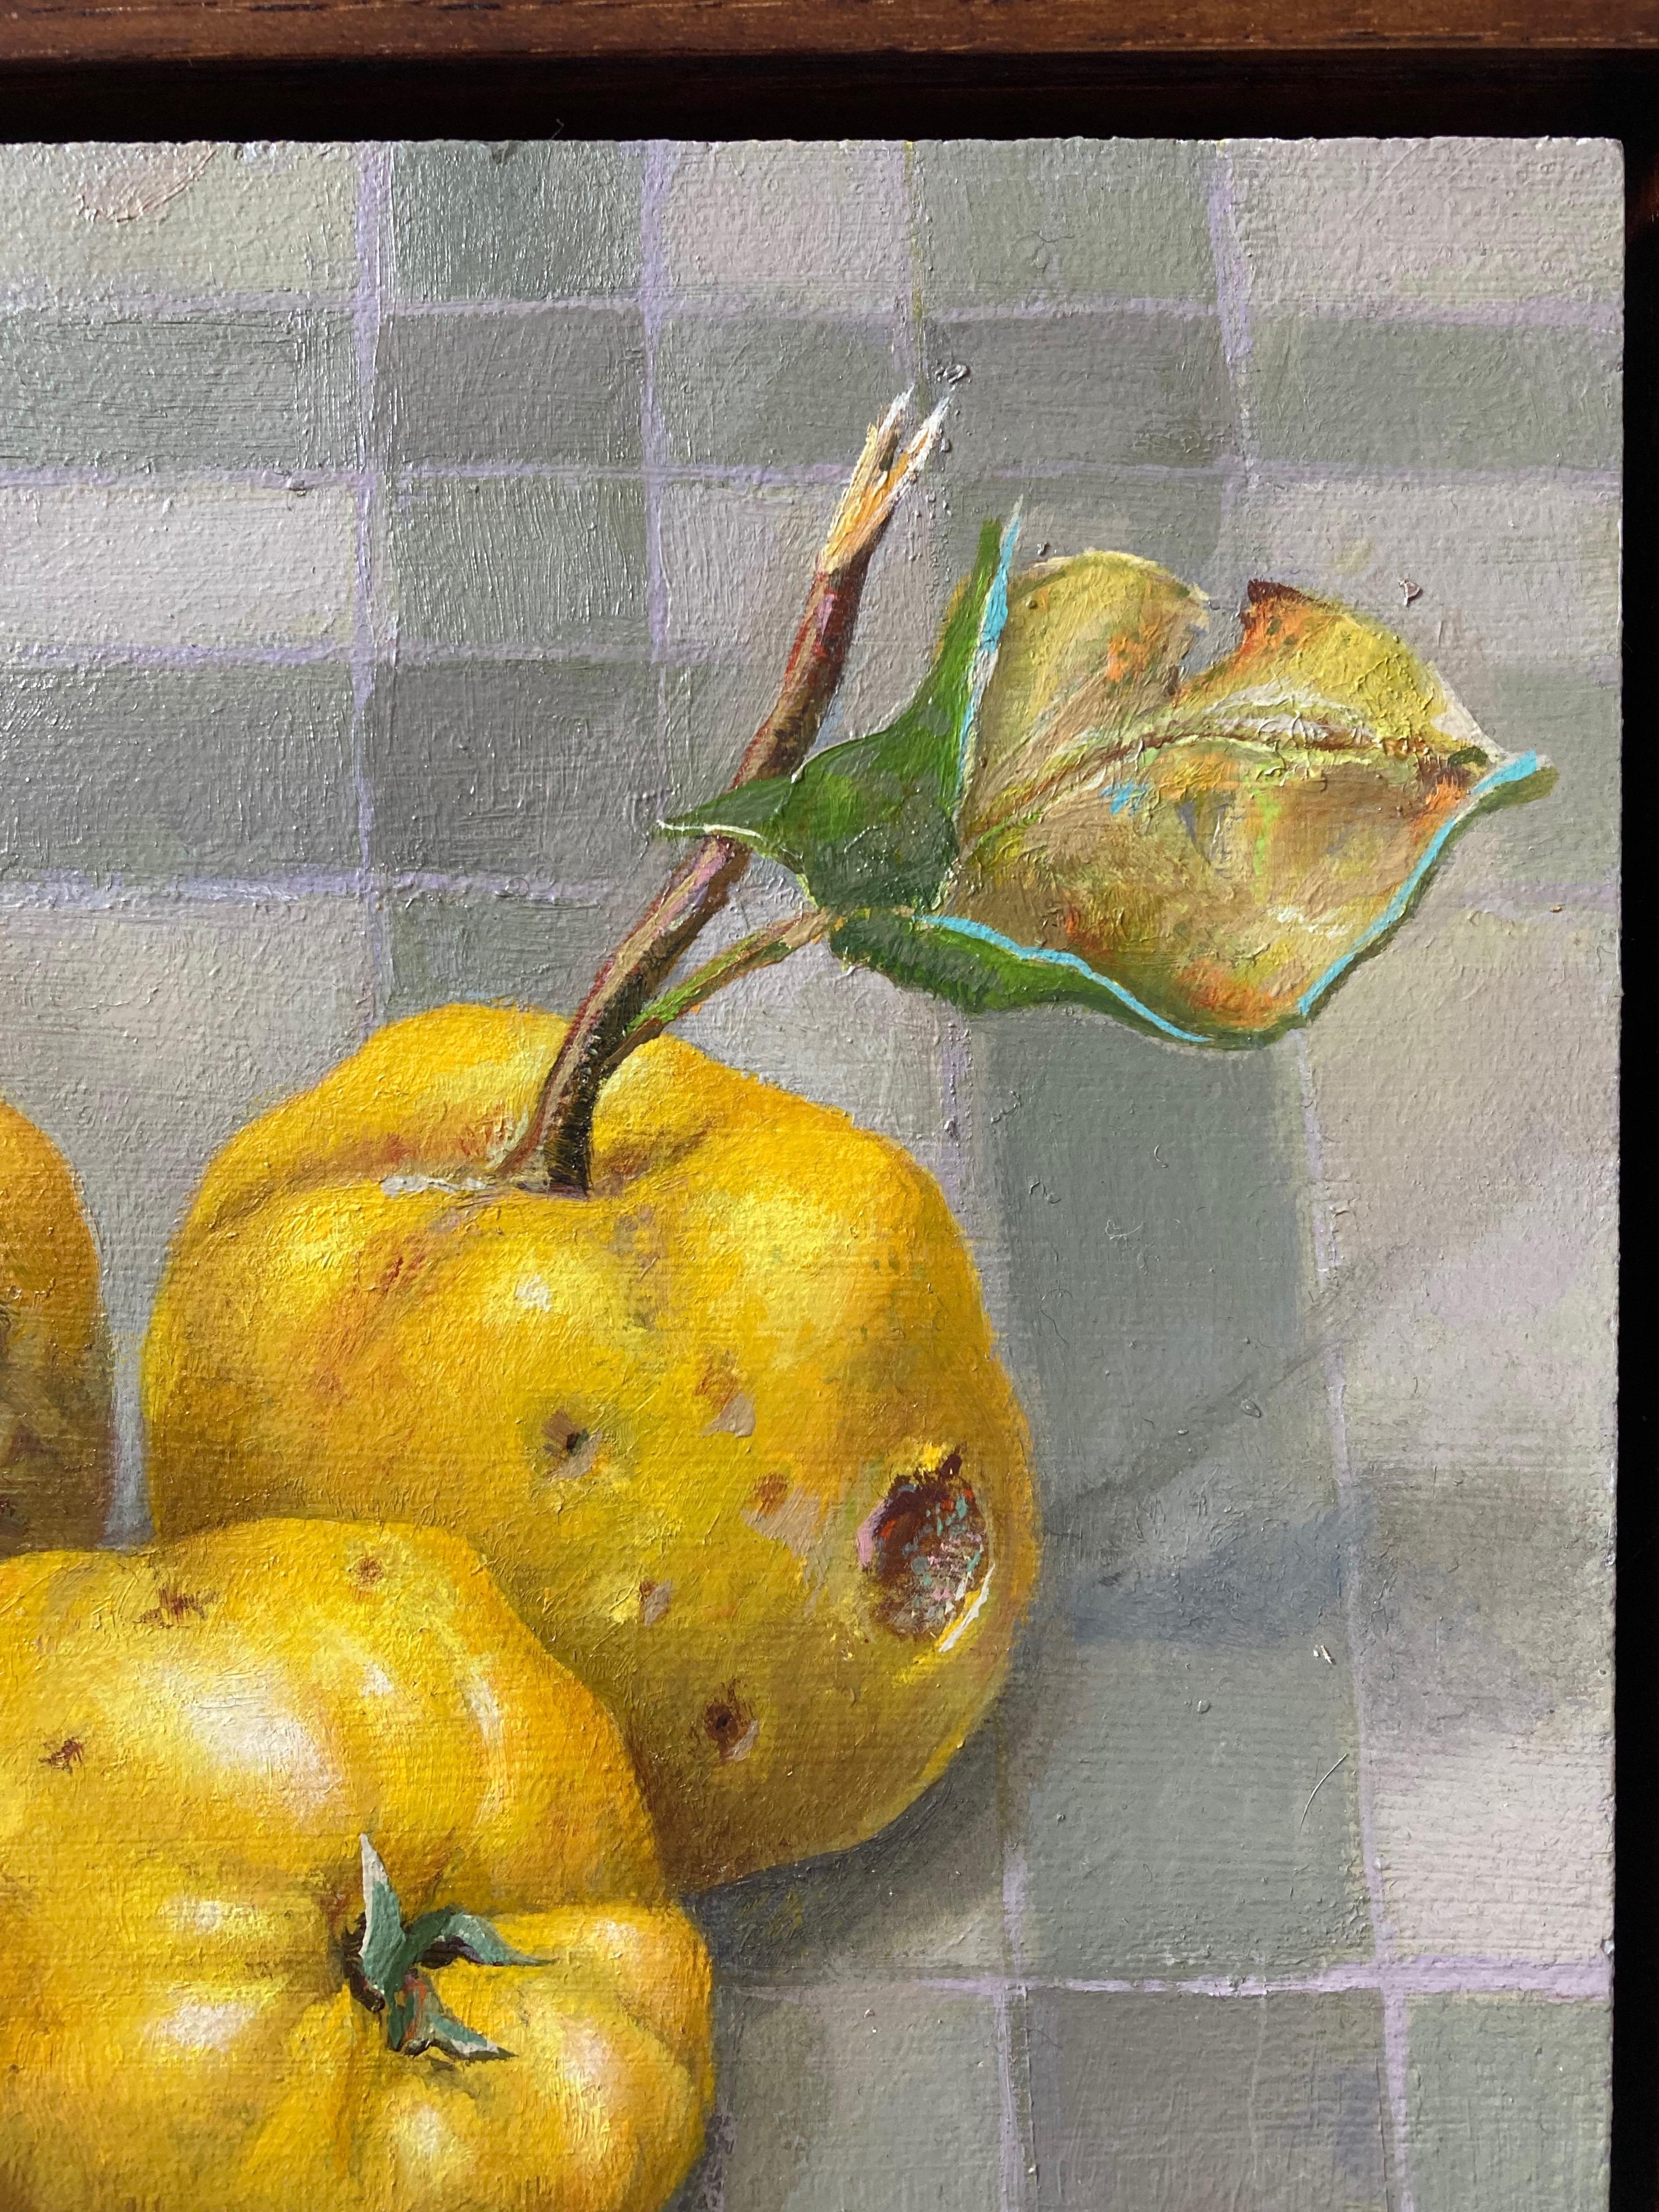 A really striking image of quinces on a tablecloth with vivid colour and wonderful detail.

Val Archer, Contemporary
Three Quinces
Signed with initials
Oil on board
8 x 8 inches 
9 x 9 inches with frame

Val Archer was born in Northampton where her